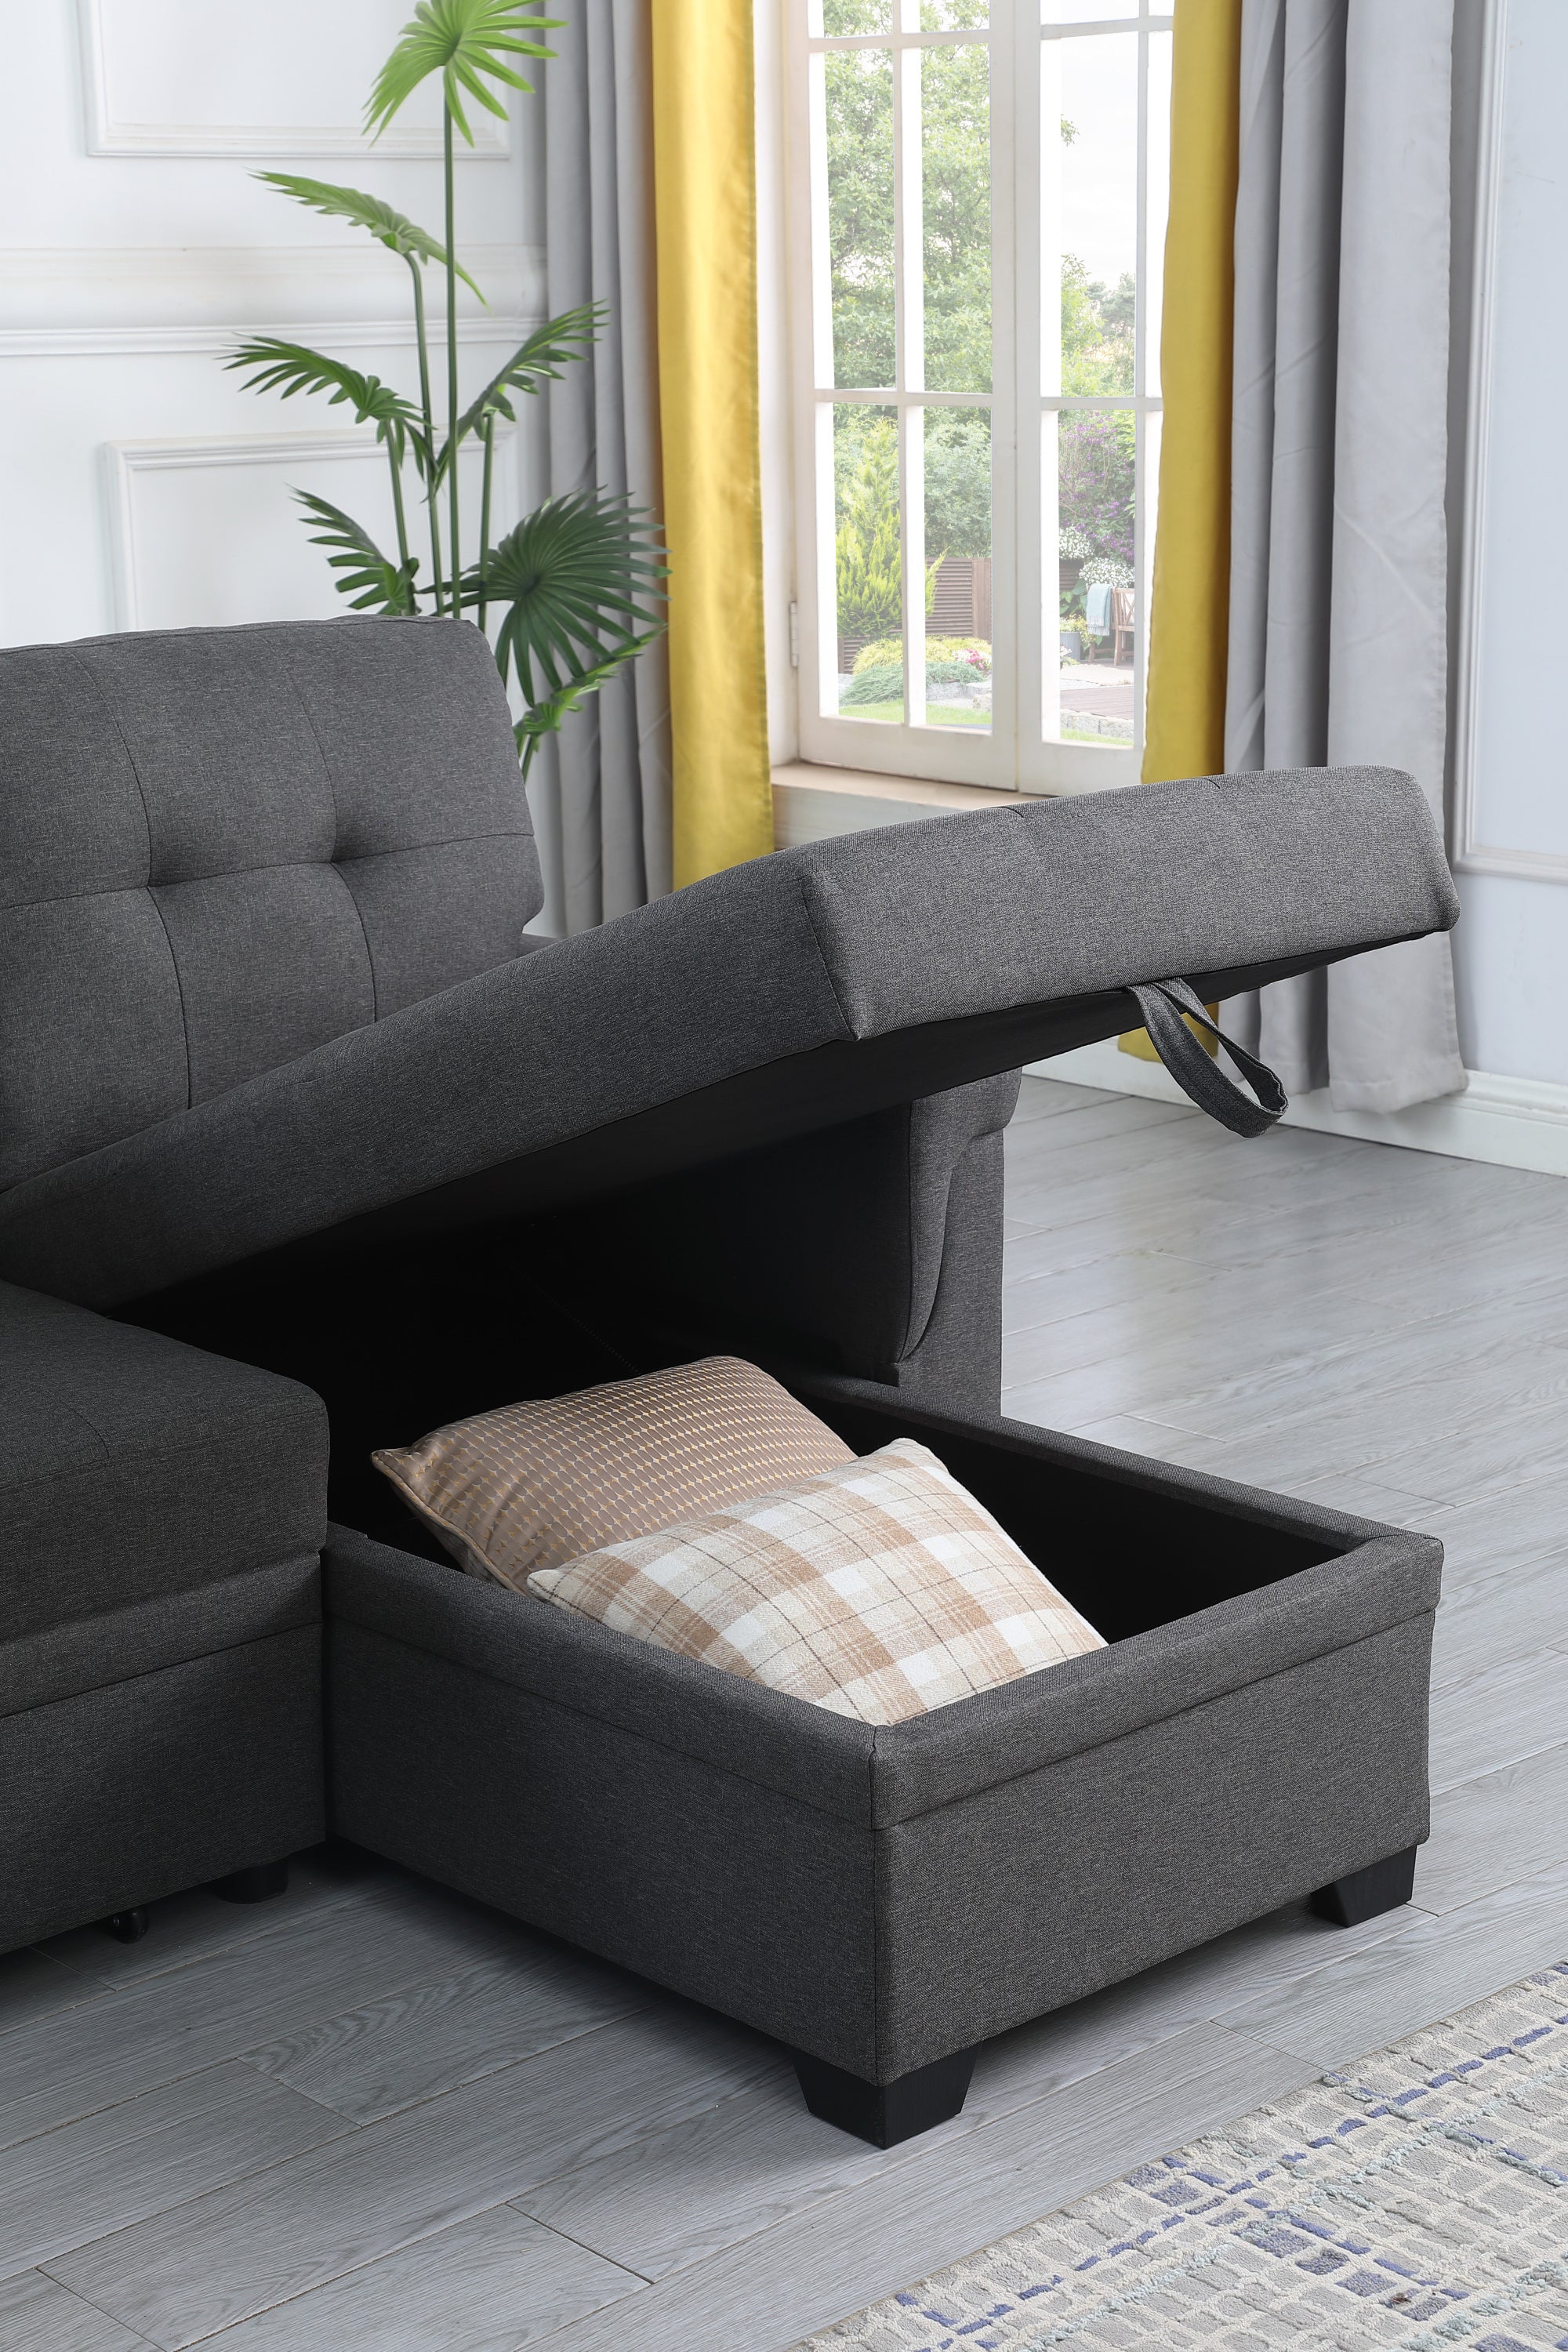 Lucca Dark Gray Linen Reversible Sleeper Sectional with Storage Chaise-Sleeper Sectionals-American Furniture Outlet